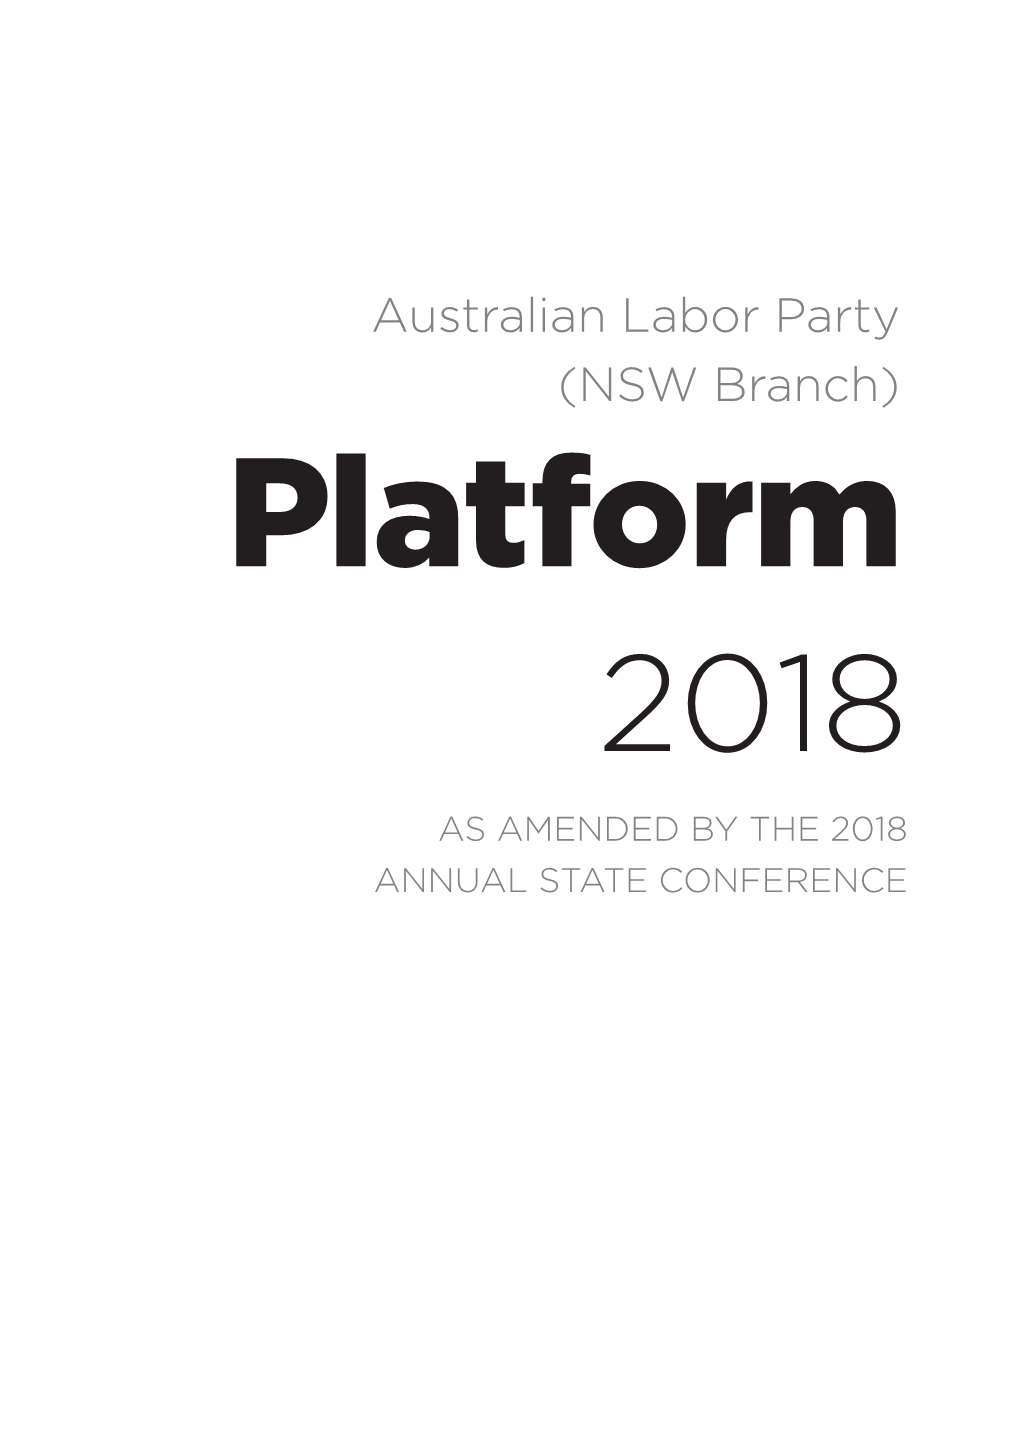 Australian Labor Party (NSW Branch) Platform 2018 AS AMENDED by the 2018 ANNUAL STATE CONFERENCE PLATFORM 2018